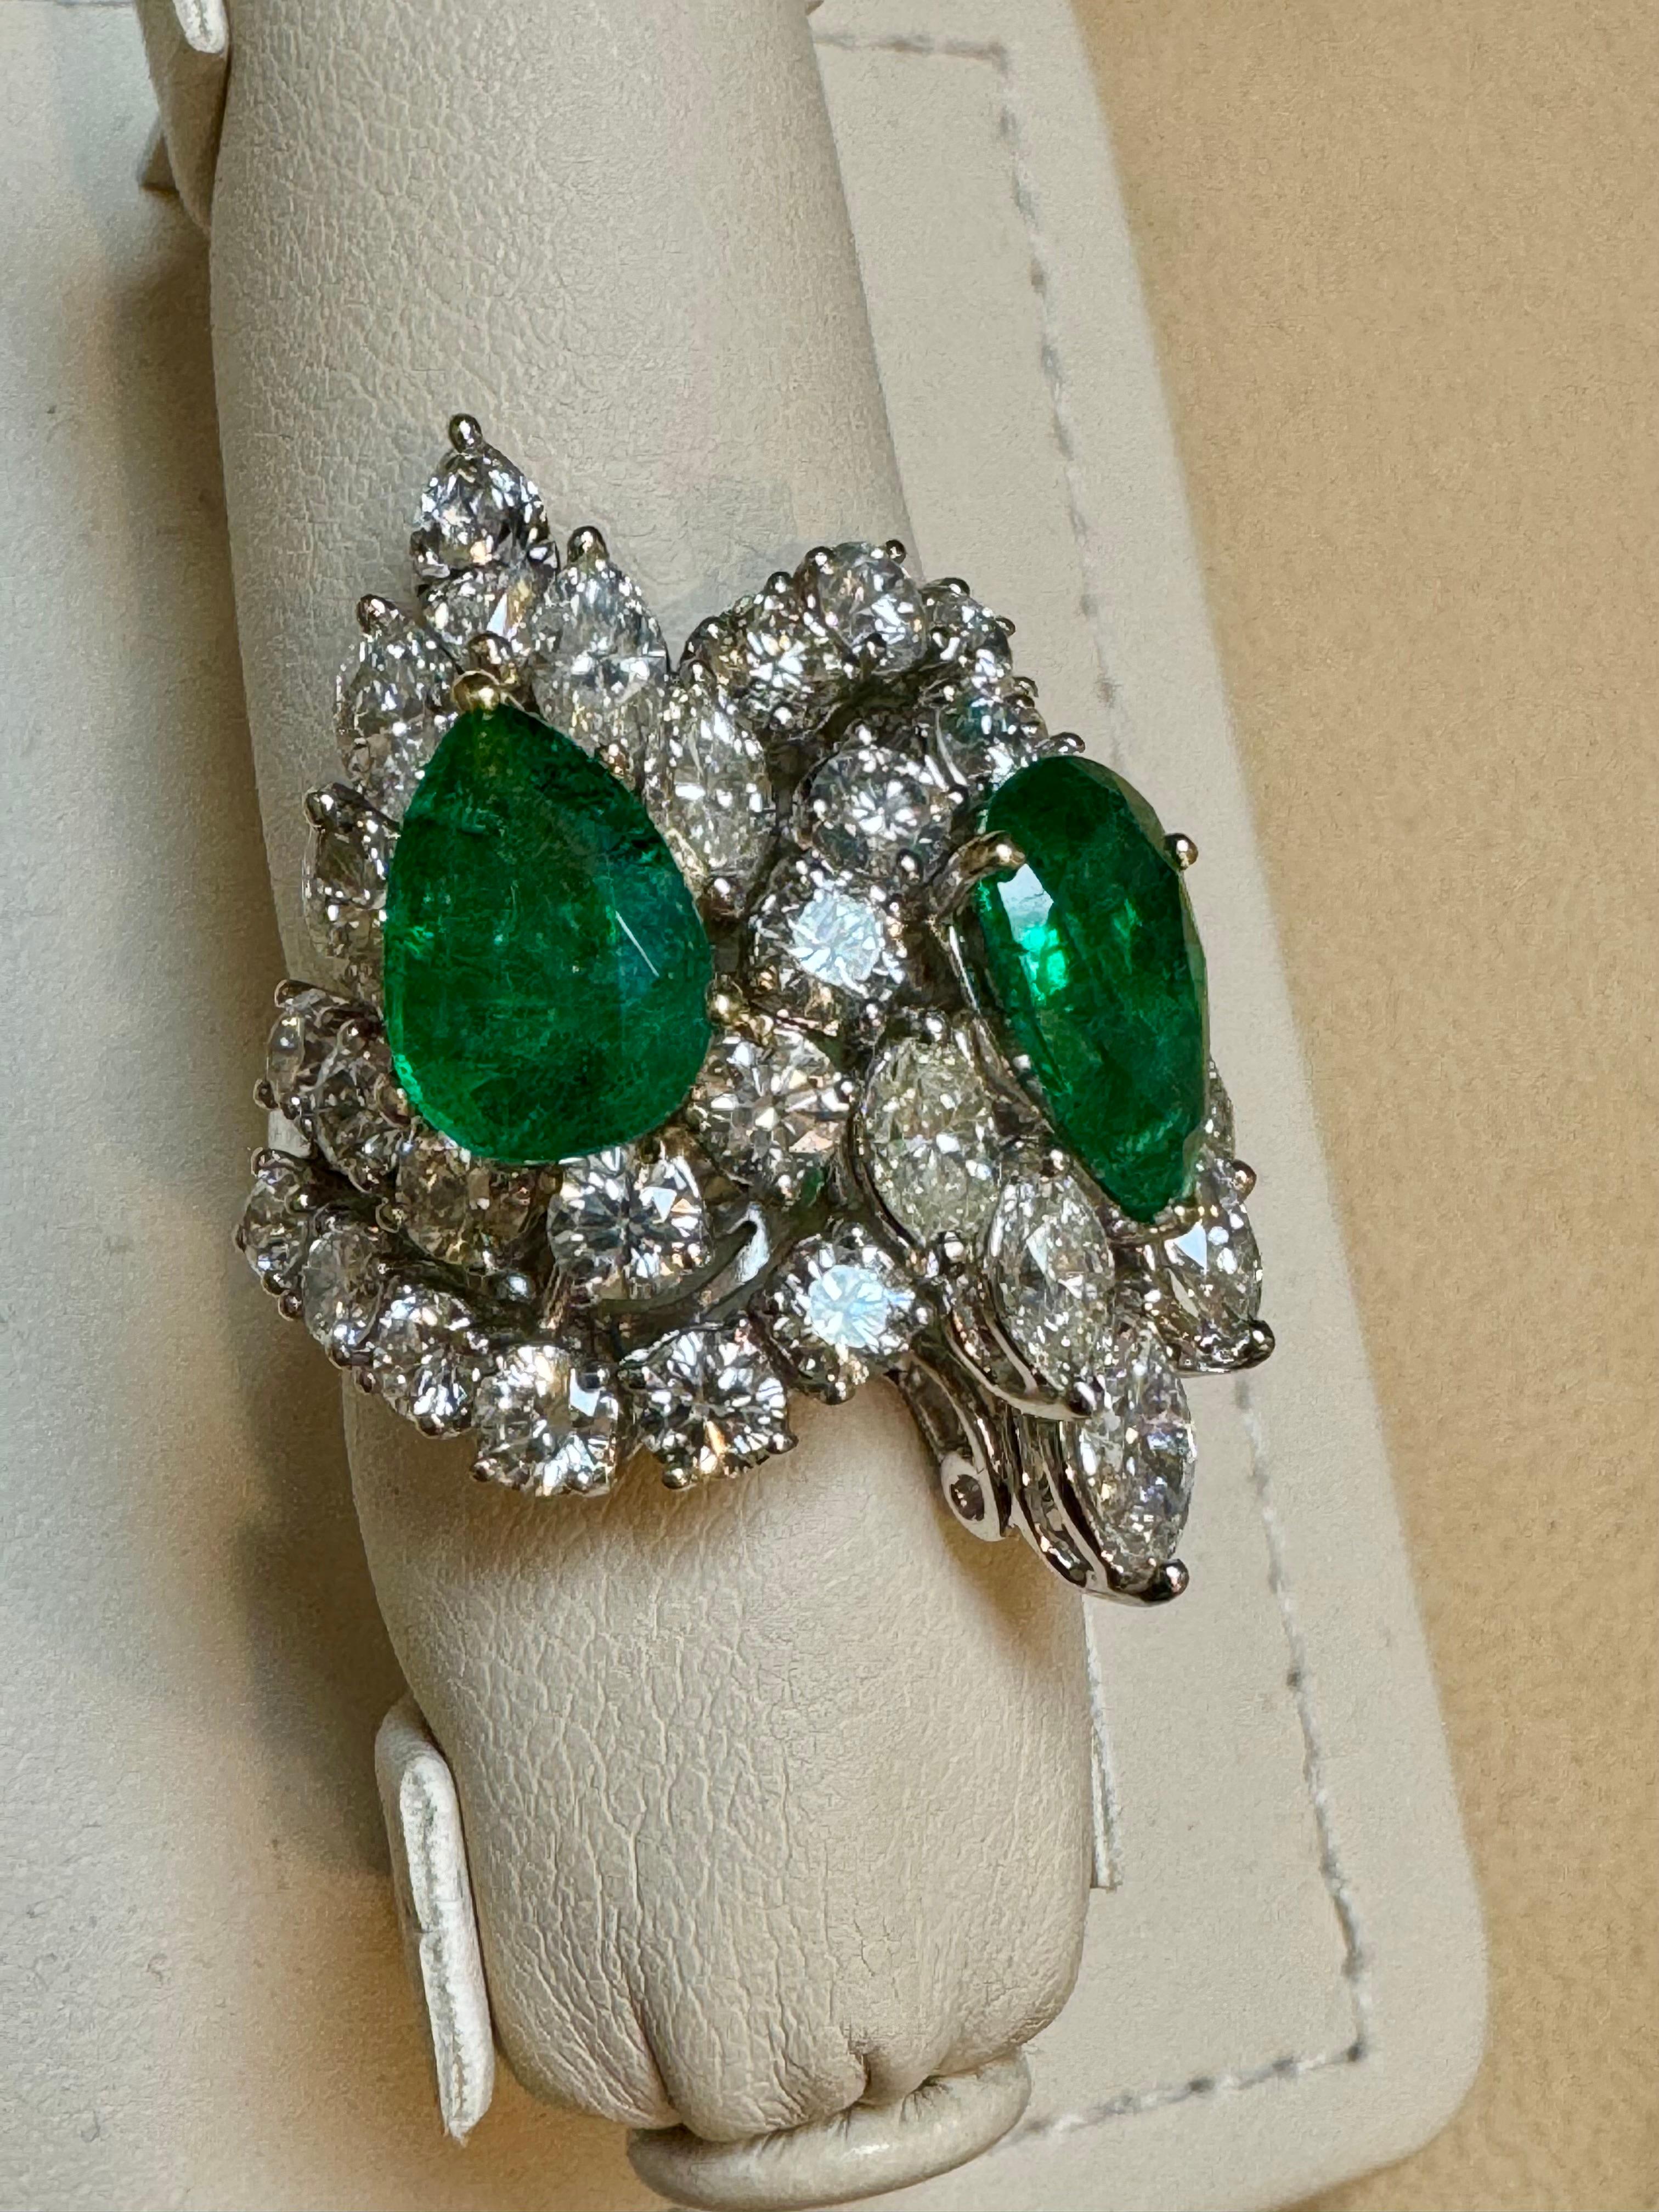 Two Pear shape 5.5 Ct Emerald  & 8.5 Ct Diamond Ring,  18K White Gold Size 6 In Excellent Condition For Sale In New York, NY